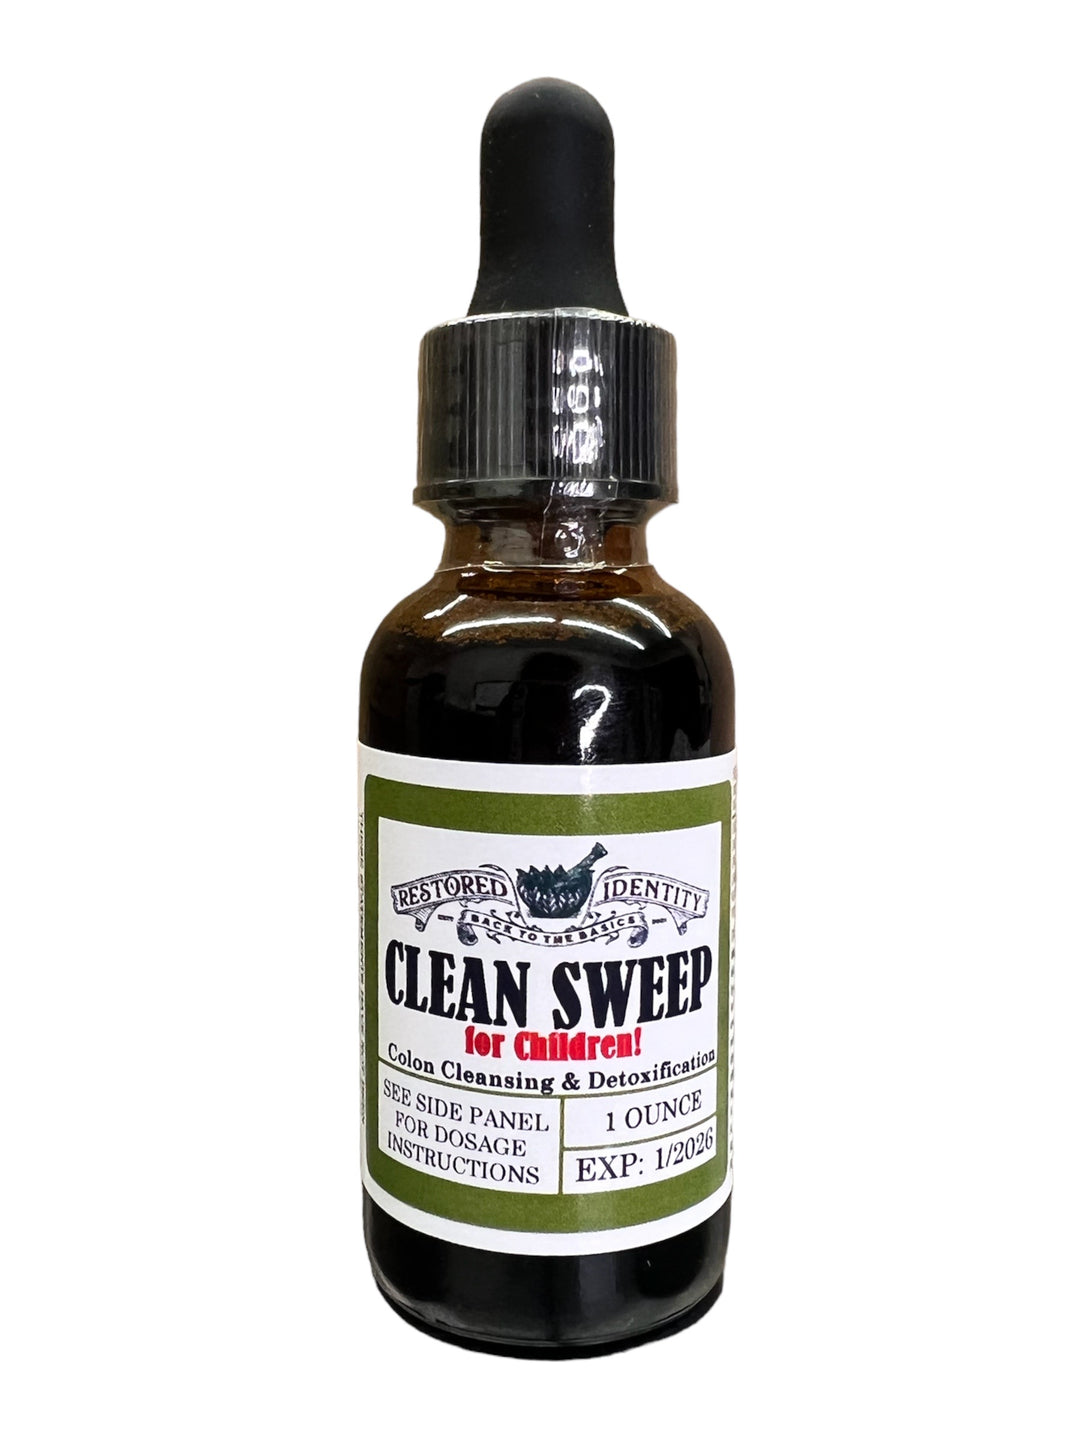 Clean Sweep Extract for Children